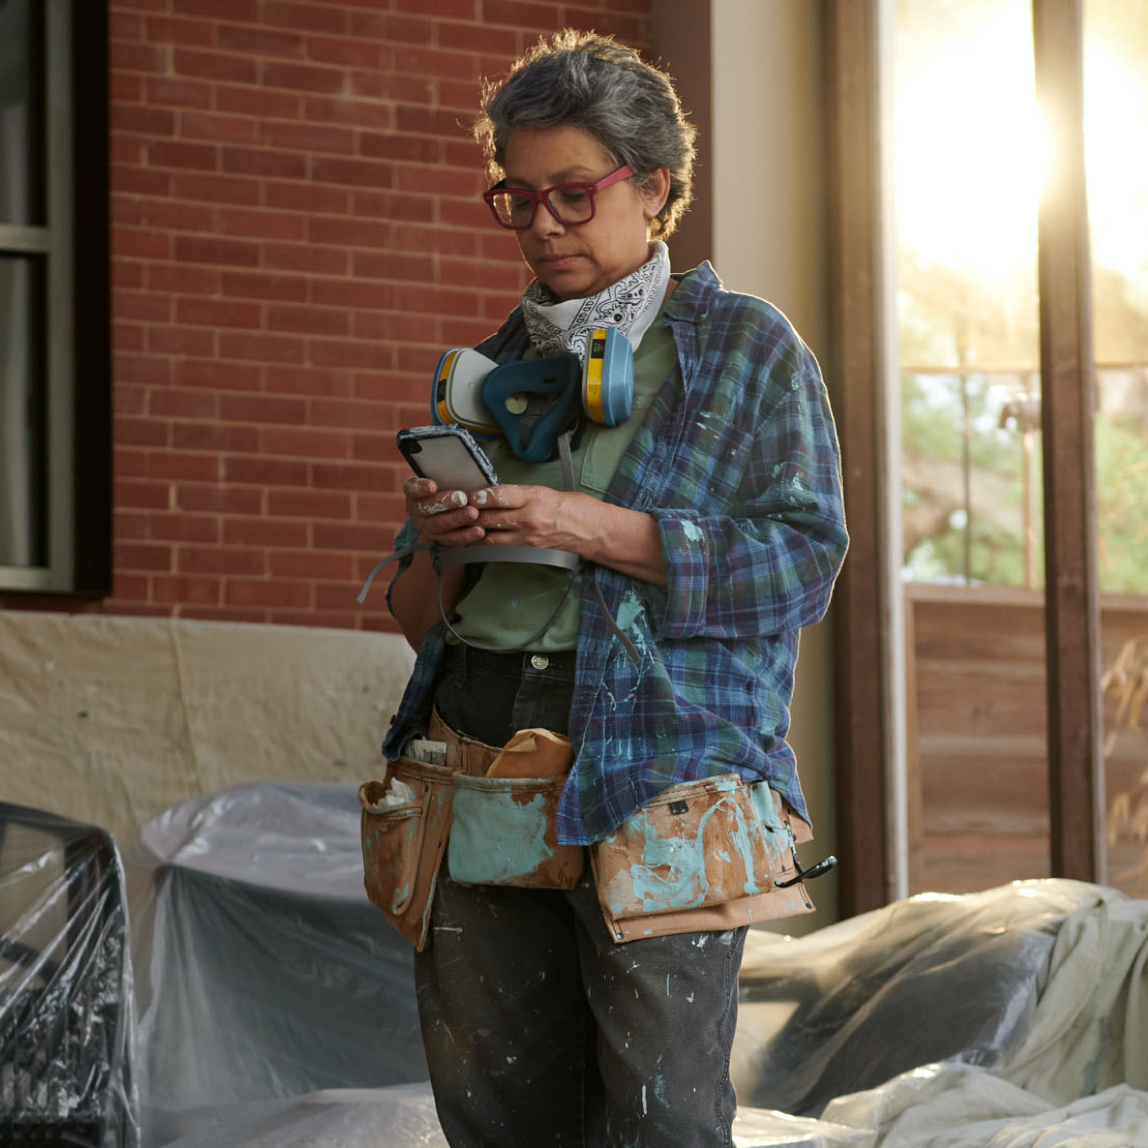 Painter looking at her phone. Wears red glasses, flannel shirt and tool belt, with respirator and bandana around neck. 